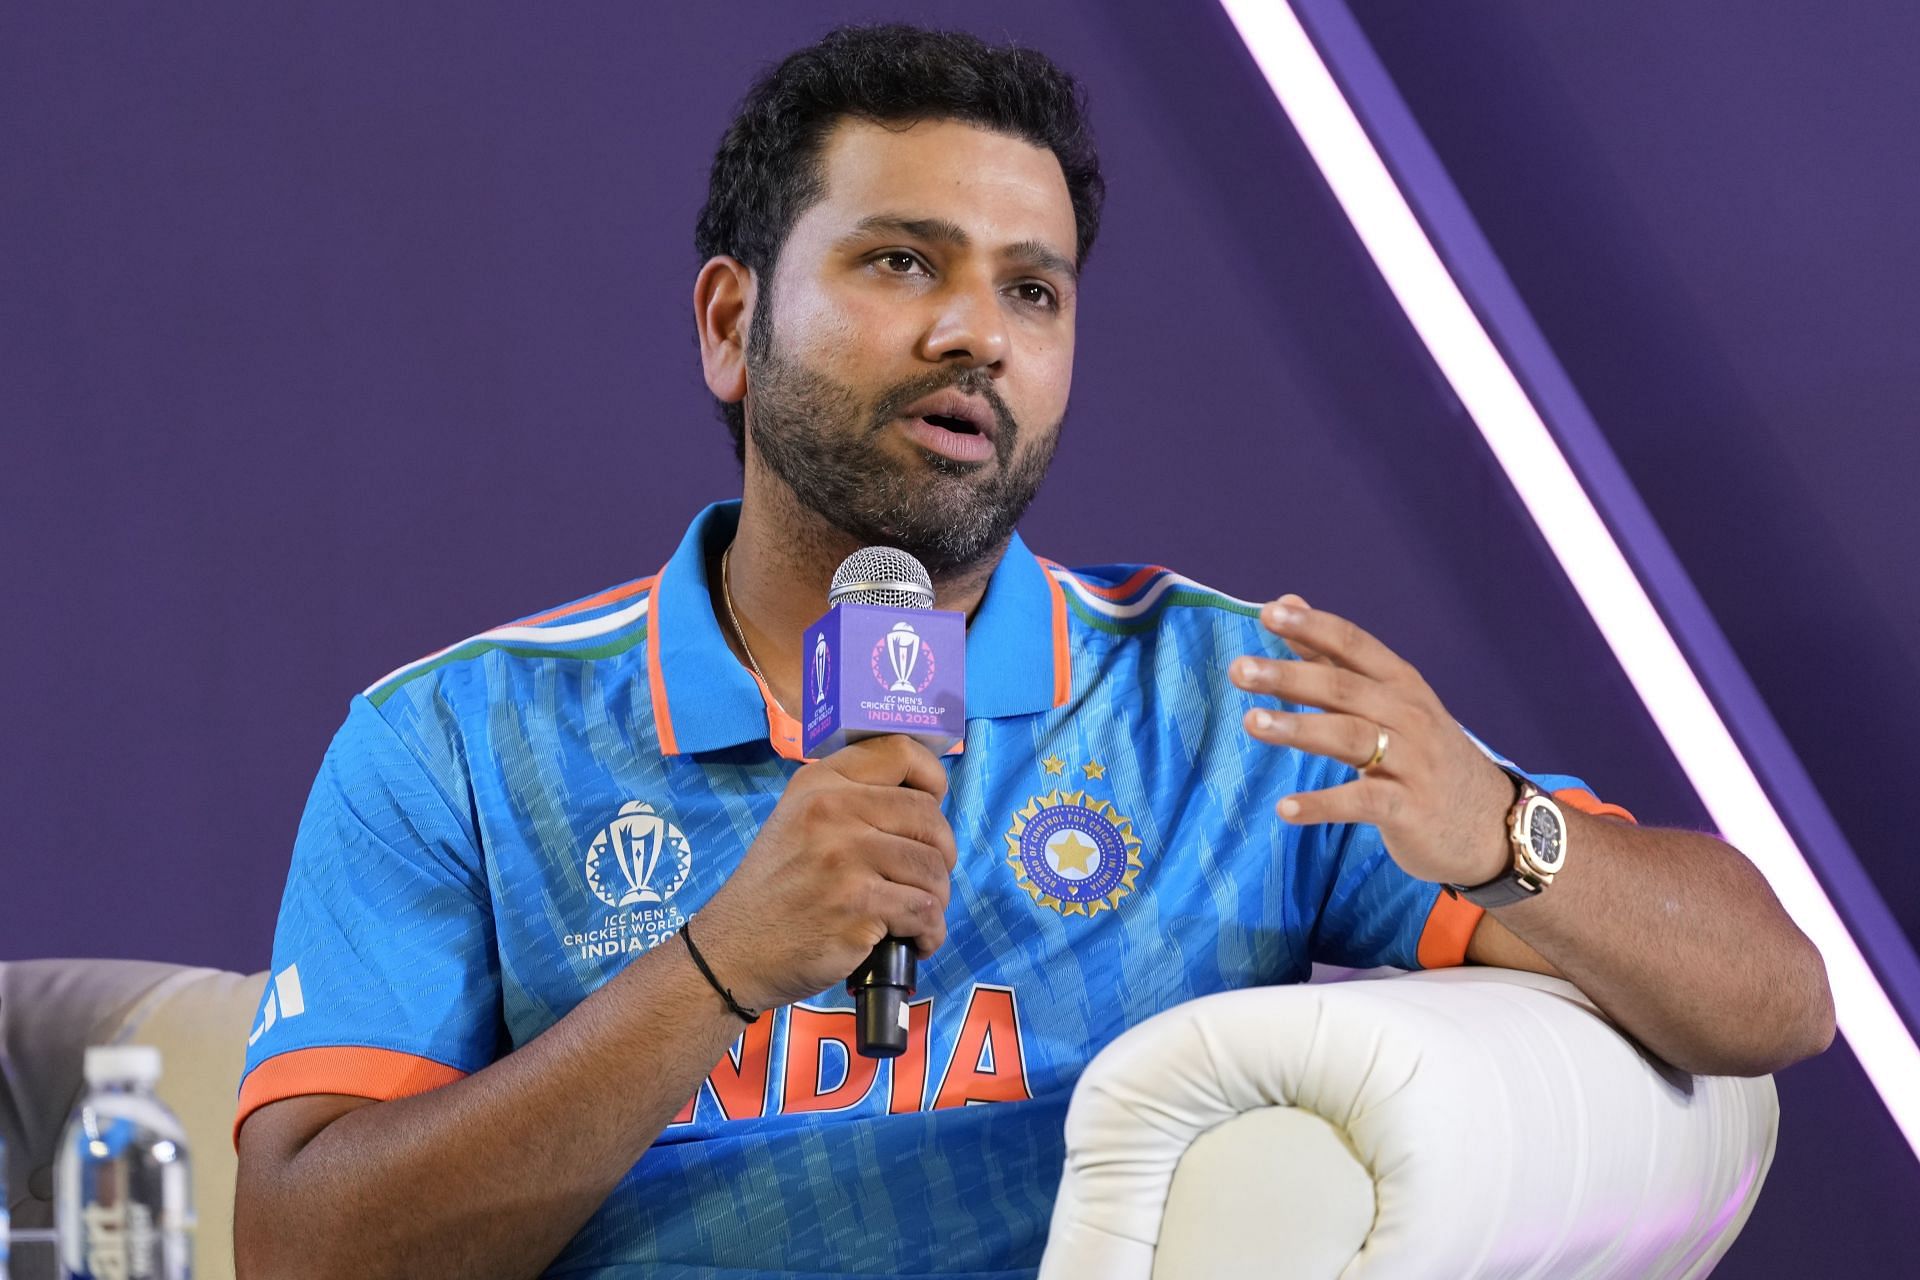 Rohit Sharma has been one of the standout batters of the tournament so far